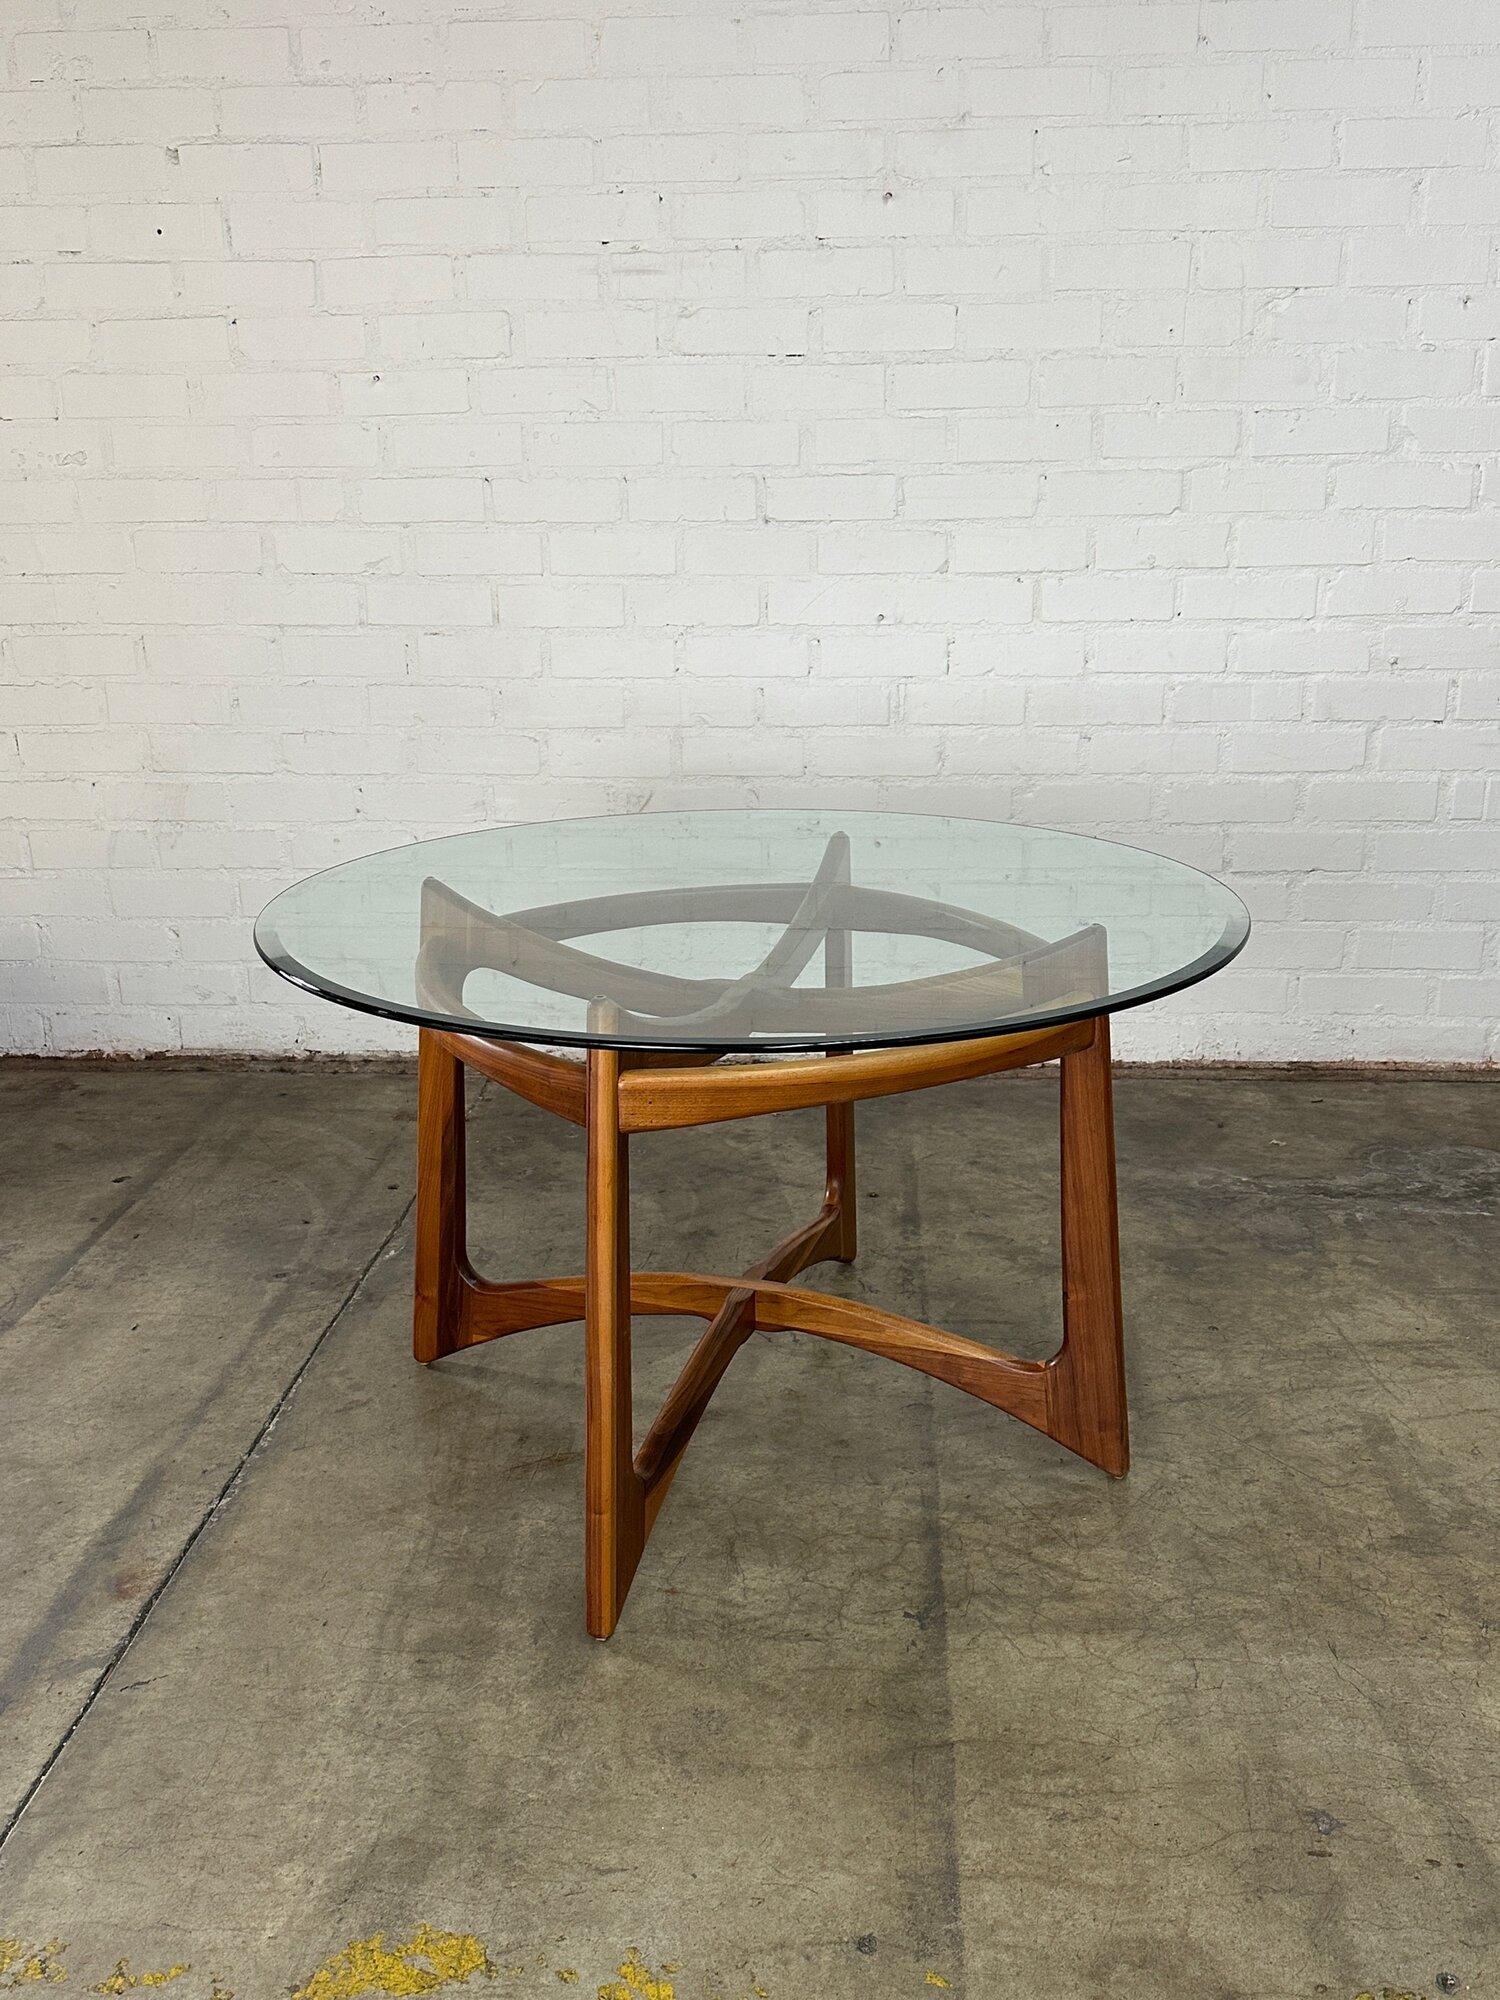 W48 H29.25 KC28 BASE WIDTH 29

Fully restored Adrian Pearsall dining table in solid walnut with a glass surface. Item is structurally sound and sturdy. Surface glass shows well no visible chips or cracks. One visible scratch on surface has been